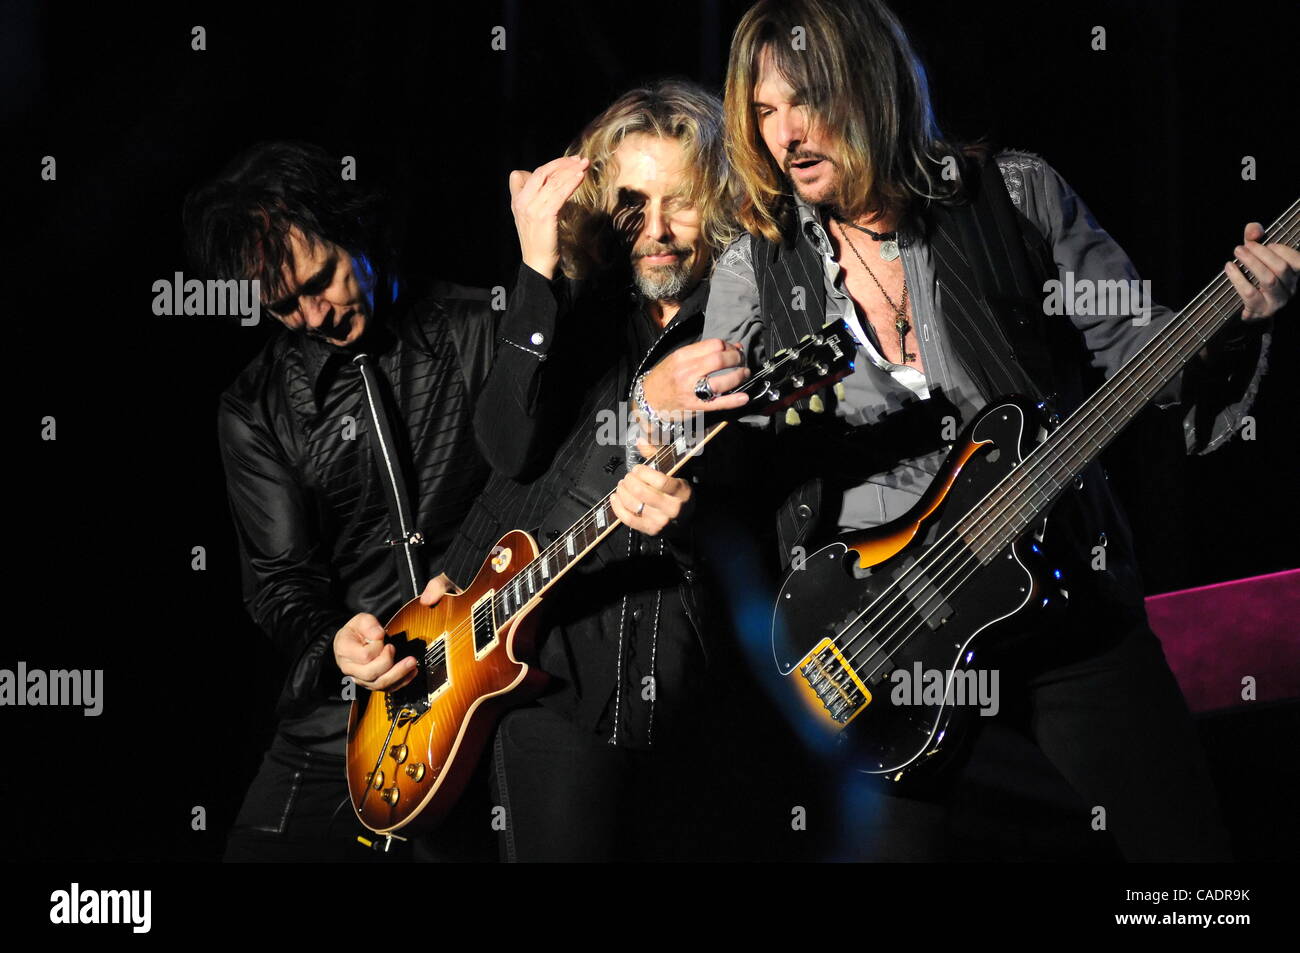 L-R) Lawrence Gowan,Tommy Shaw and Ricky Phillips of the band Styx performed a live concert at the 2010 Ventura County Fair in Ventura, CA. on August 7, 2010.(Credit Image: © John Pyle/Cal Sport Media/ZUMApress.com) Stock Photo